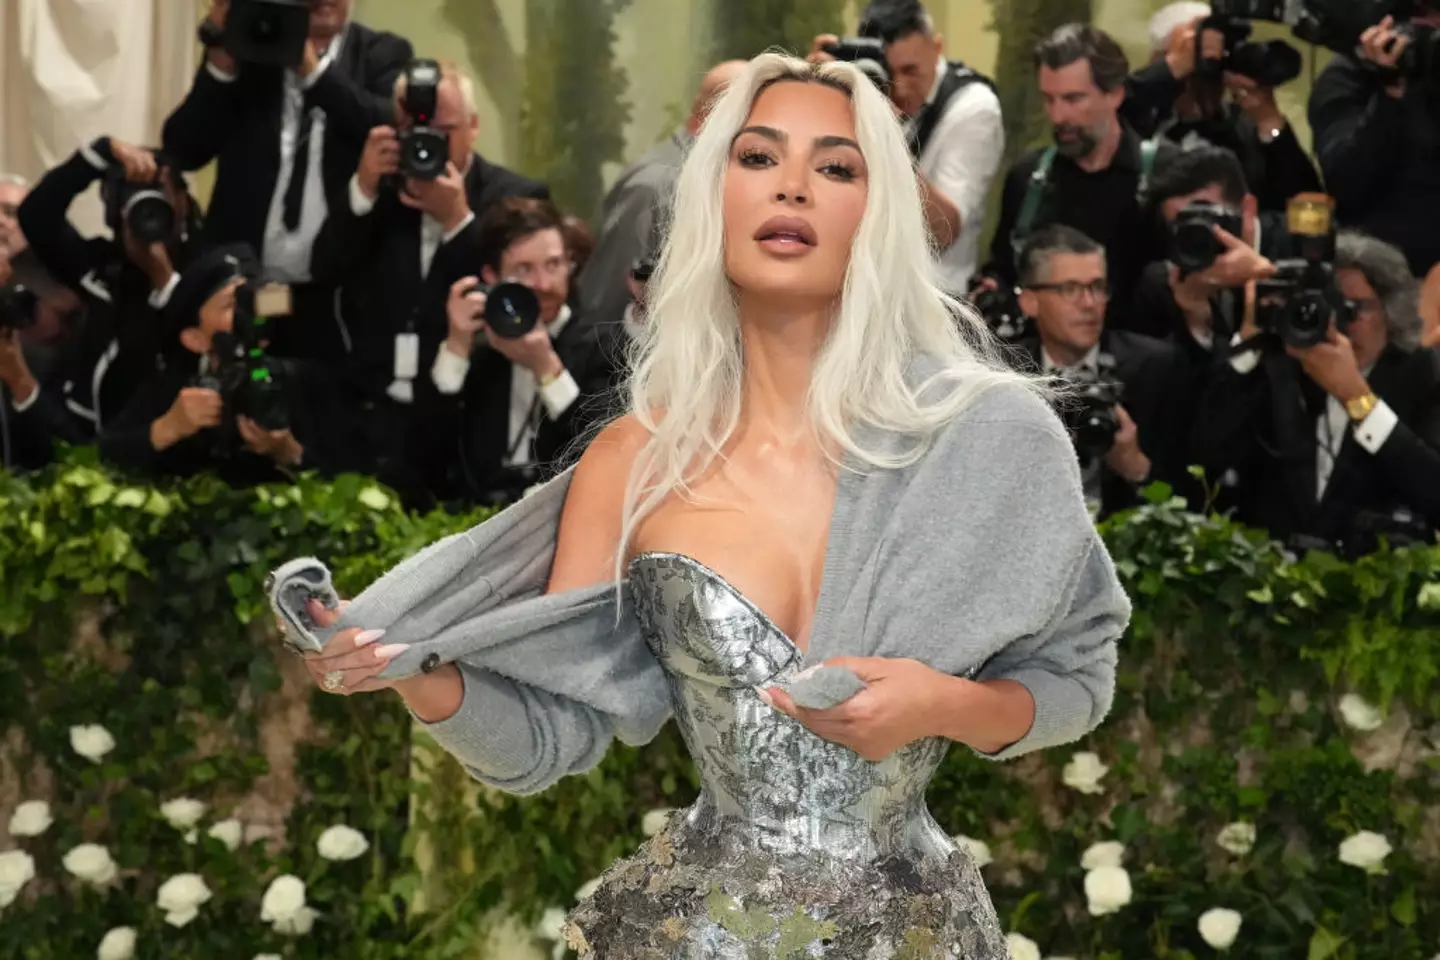 Kim Kardashian caused a lot of uproar with her outfit choice for the Met Gala. (Jeff Kravitz/FilmMagic/Getty)